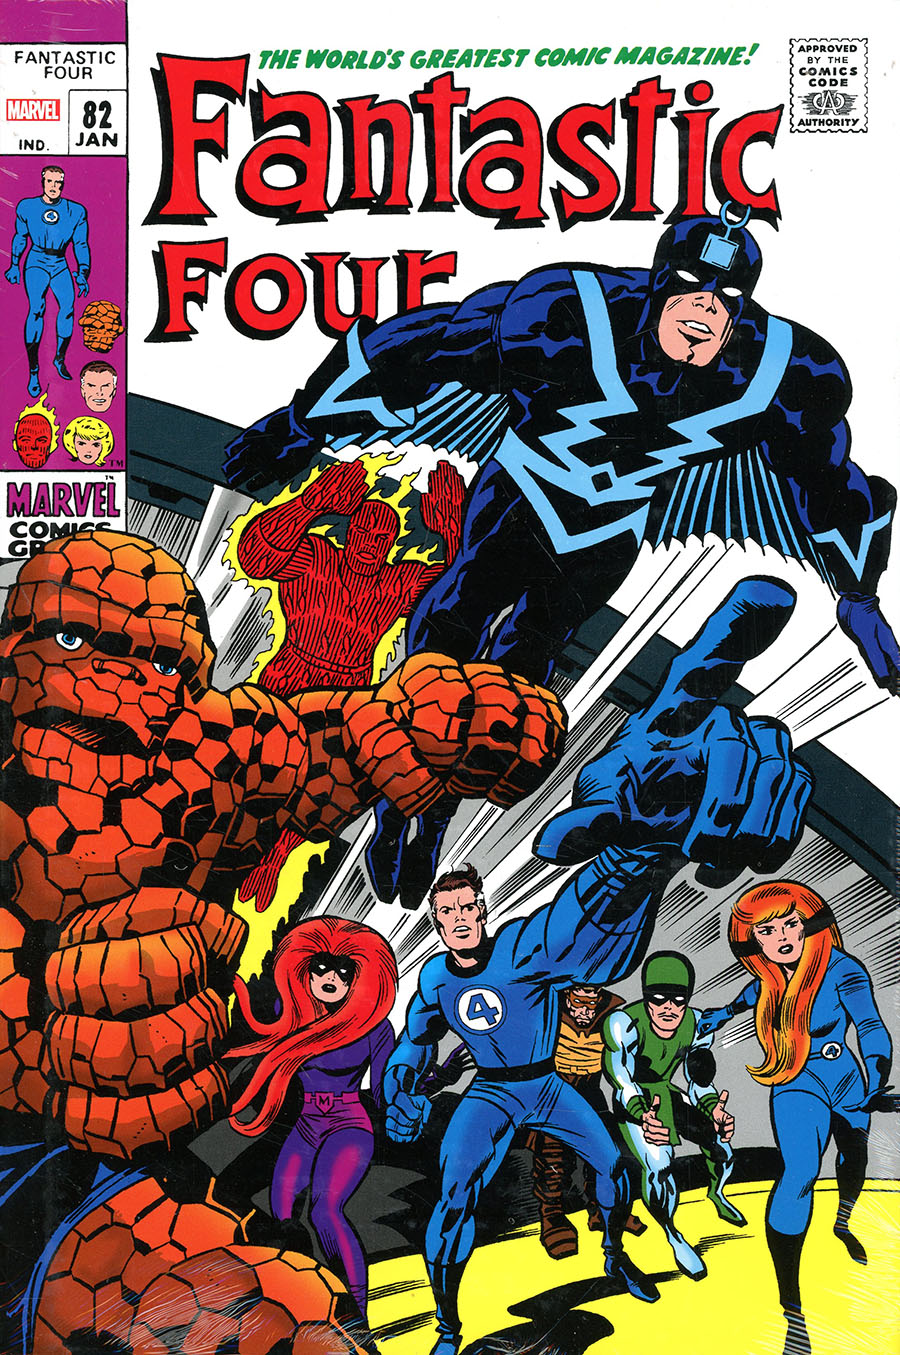 Fantastic Four Omnibus Vol 3 HC Direct Market Jack Kirby Variant Cover New Printing